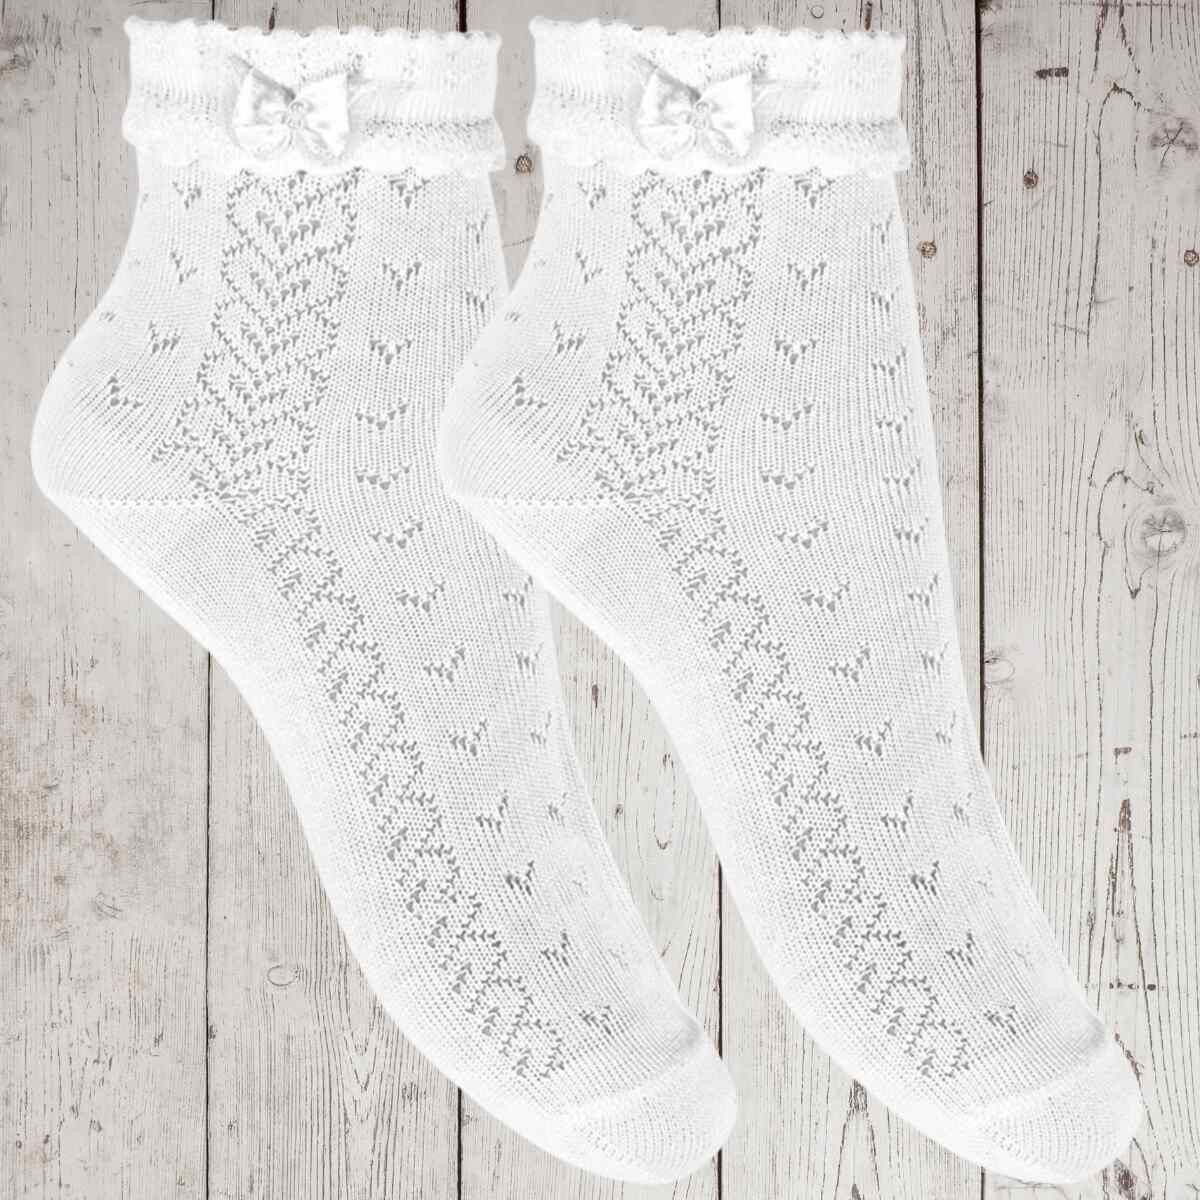 CEREMONY OPENWORK ANKLE SOCKS WITH BOW CONDOR - 1